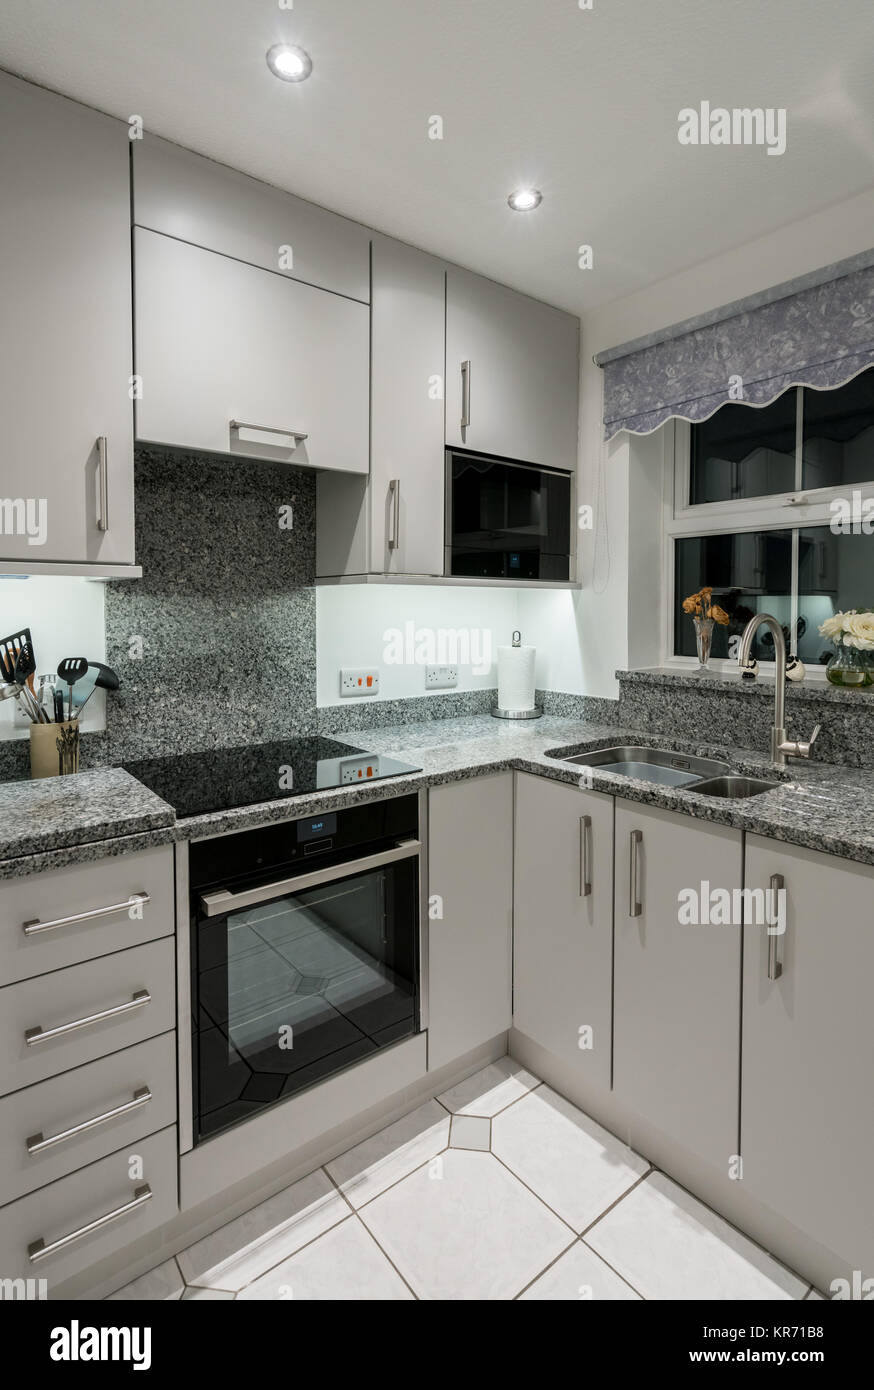 Small modern kitchen in apartment with granite worktop Stock Photo ...